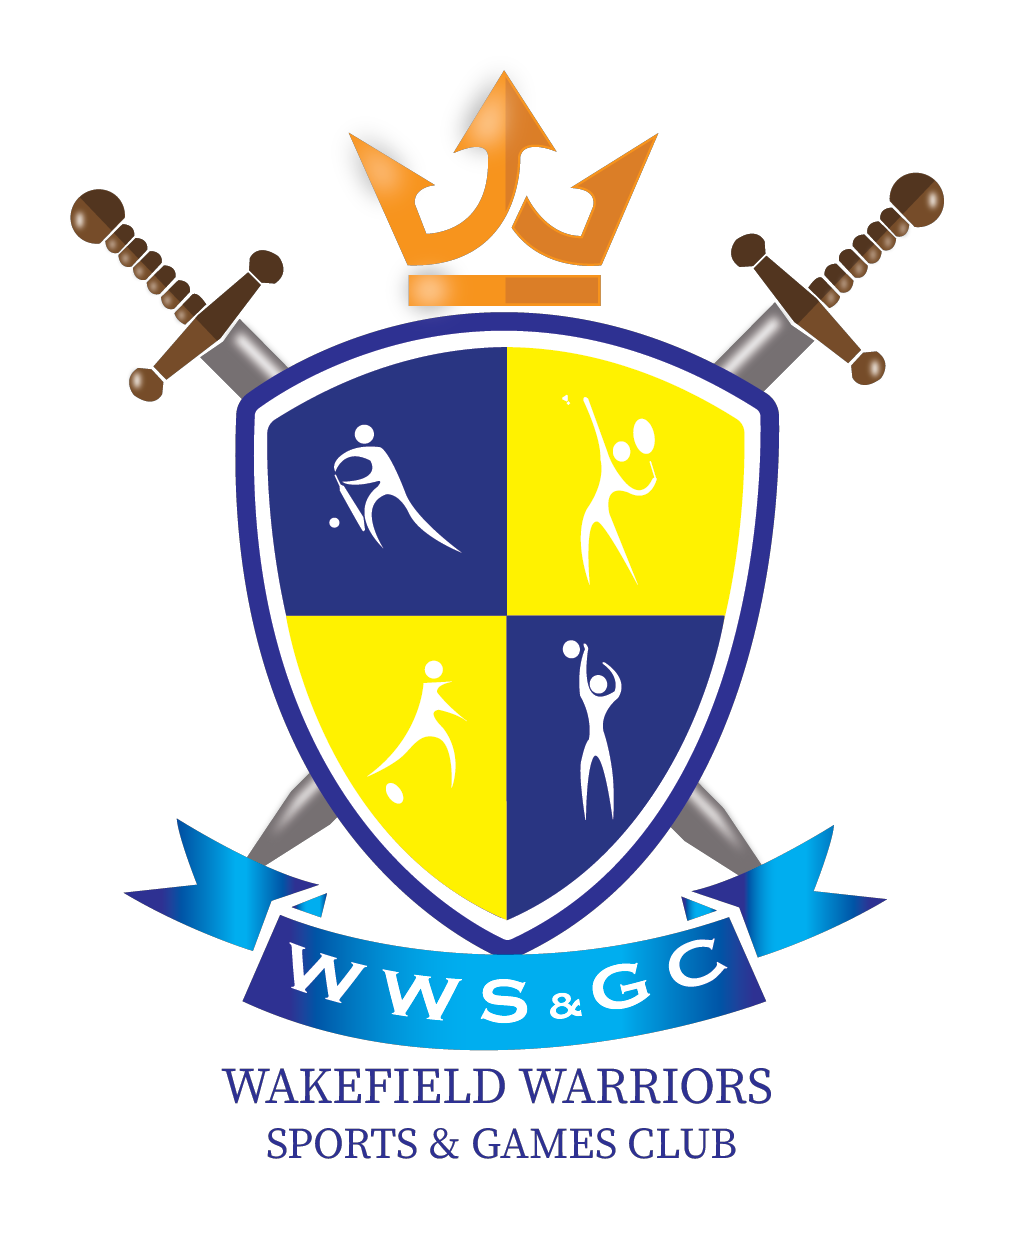 WAKEFIELD WARRIORS SPORTS AND GAMES CLUB